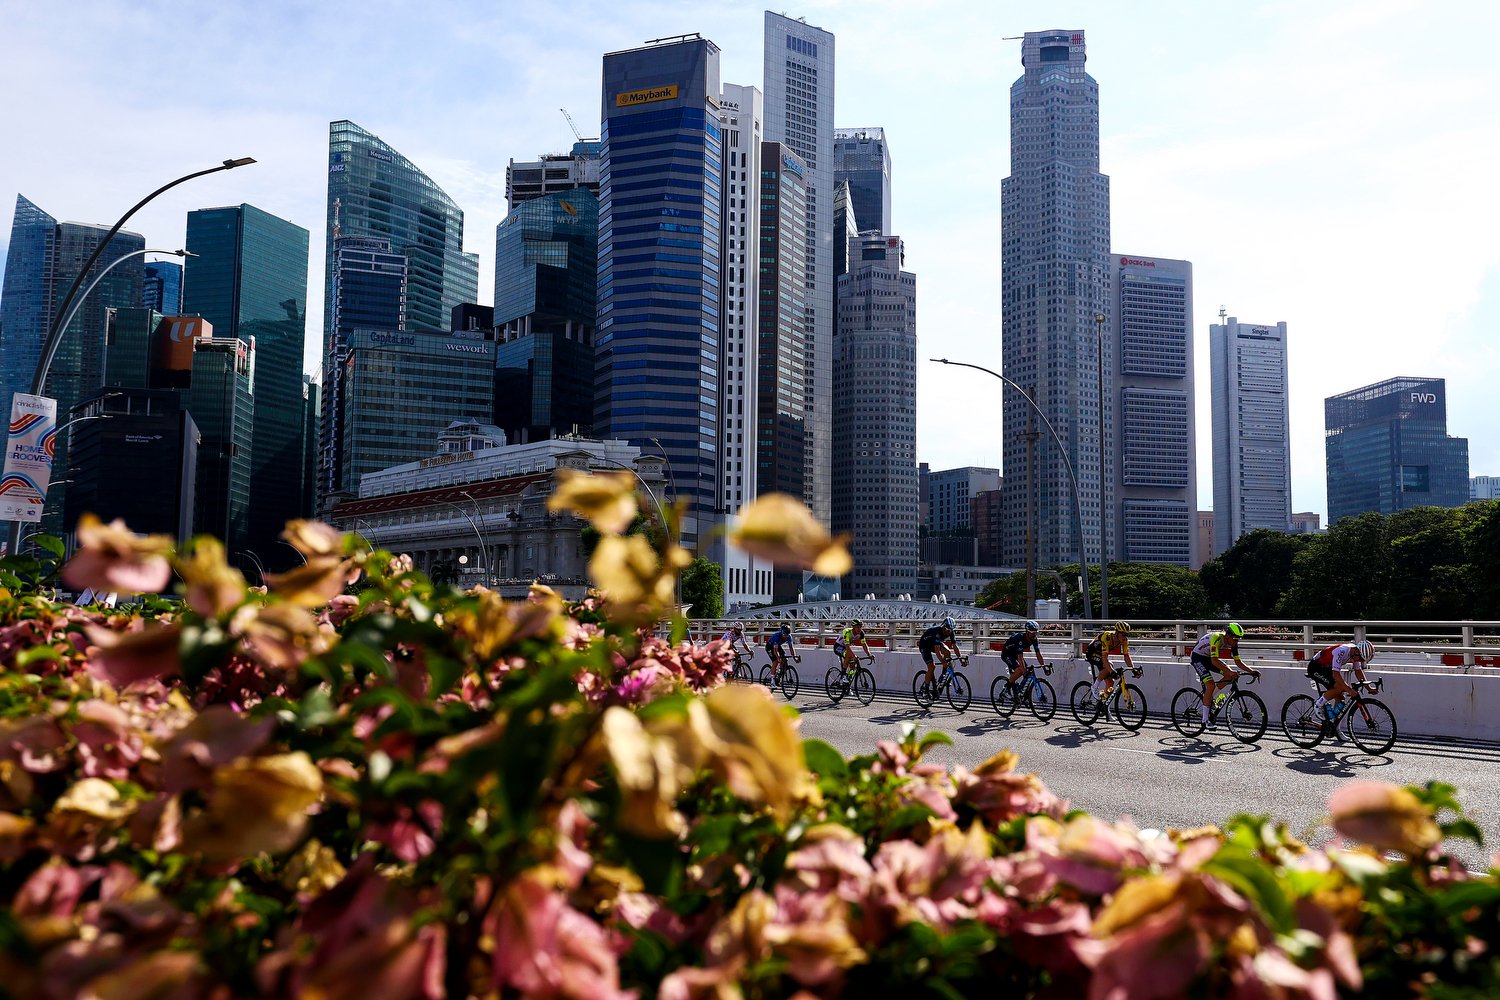  SINGAPORE, SINGAPORE - OCTOBER 30: The peloton passes through the Esplanade Bridge during the Tour de France Prudential Singapore Criterium on October 30, 2022 in Singapore. (Photo by Yong Teck Lim/Getty Images) 